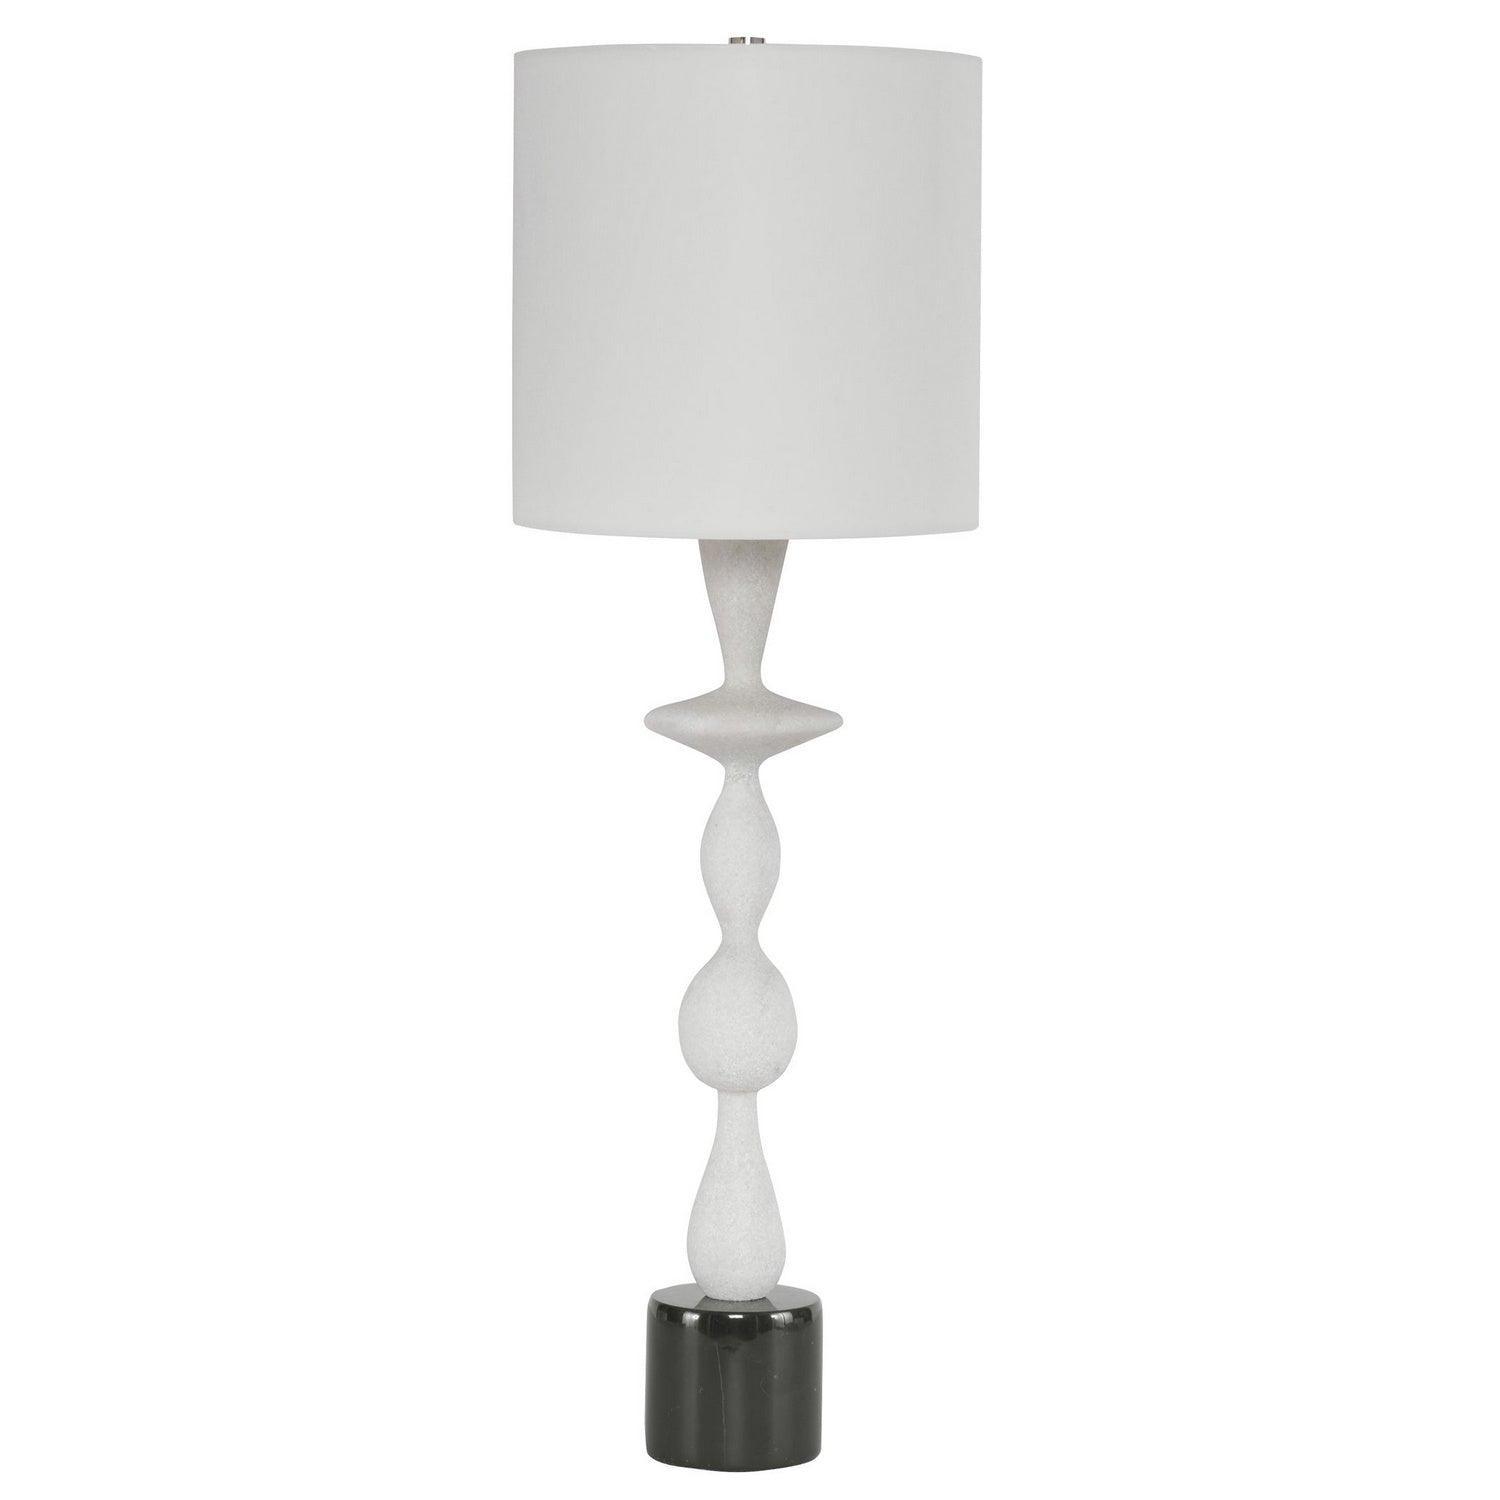 The Uttermost - Inverse One Light Table Lamp - 29796-1 | Montreal Lighting & Hardware